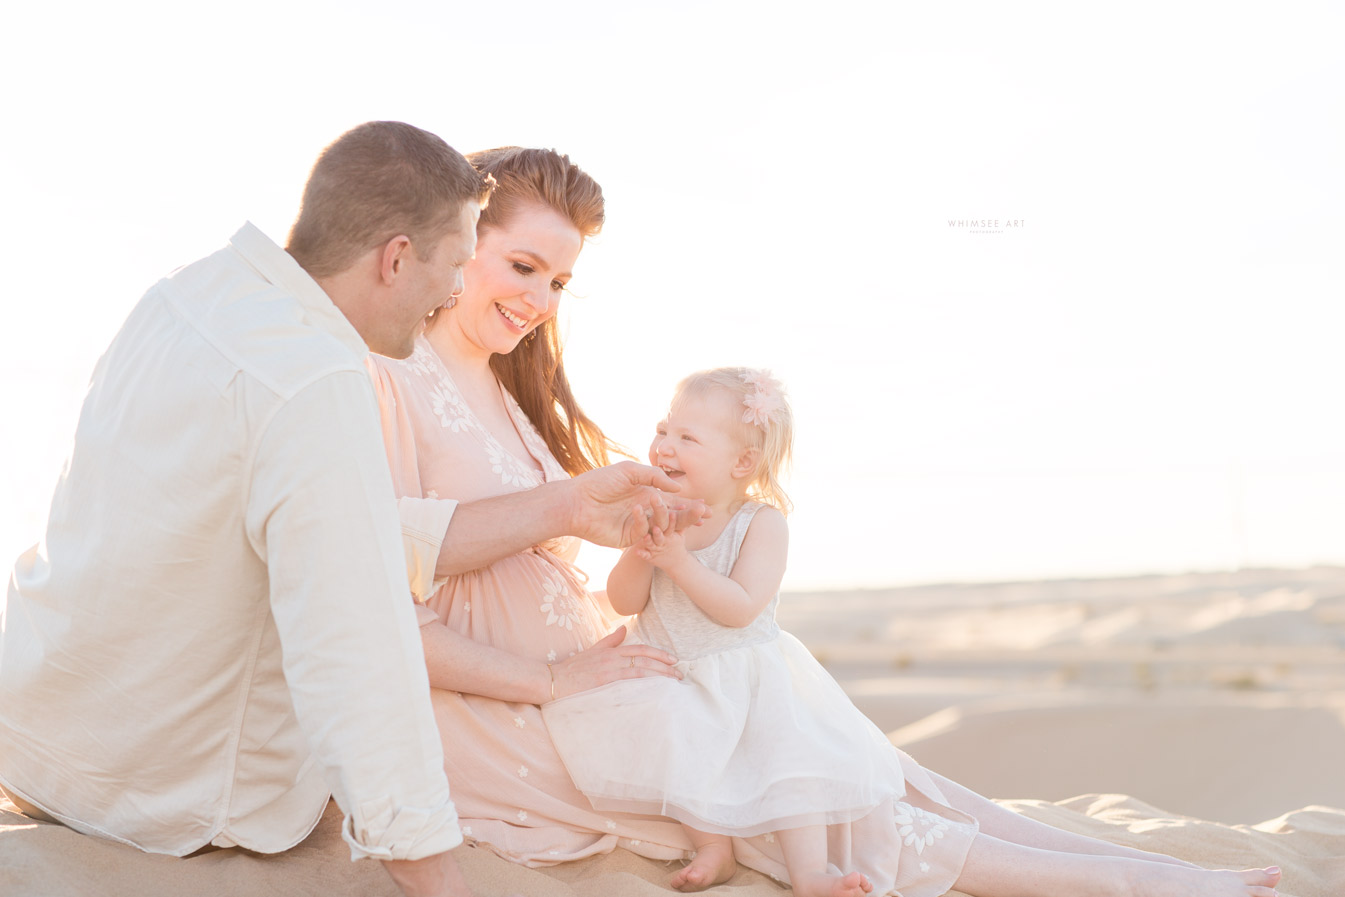 Imperial Sand Dunes Maternity/Family Session | Imperial Sand Dunes | Maternity Photographer | Whimsee Art Photography